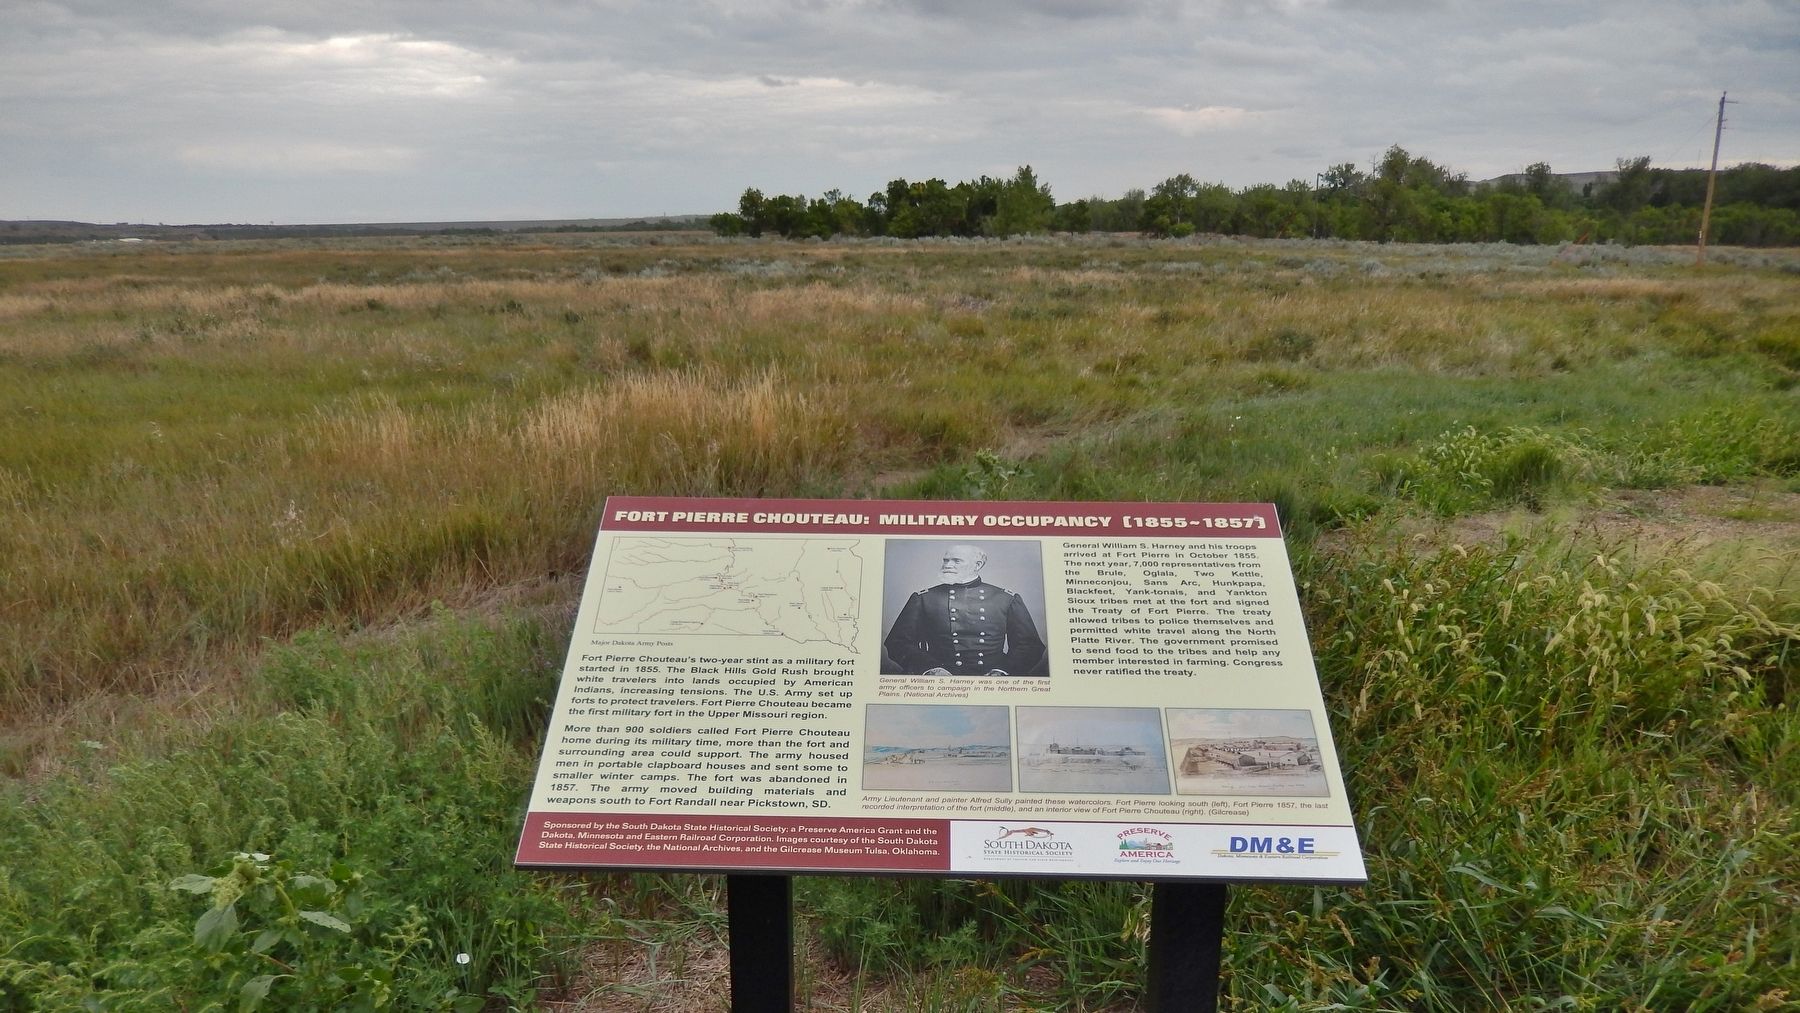 Fort Pierre Chouteau: Military Occupancy (1855-1857) Marker (<i>wide view</i>) image. Click for full size.